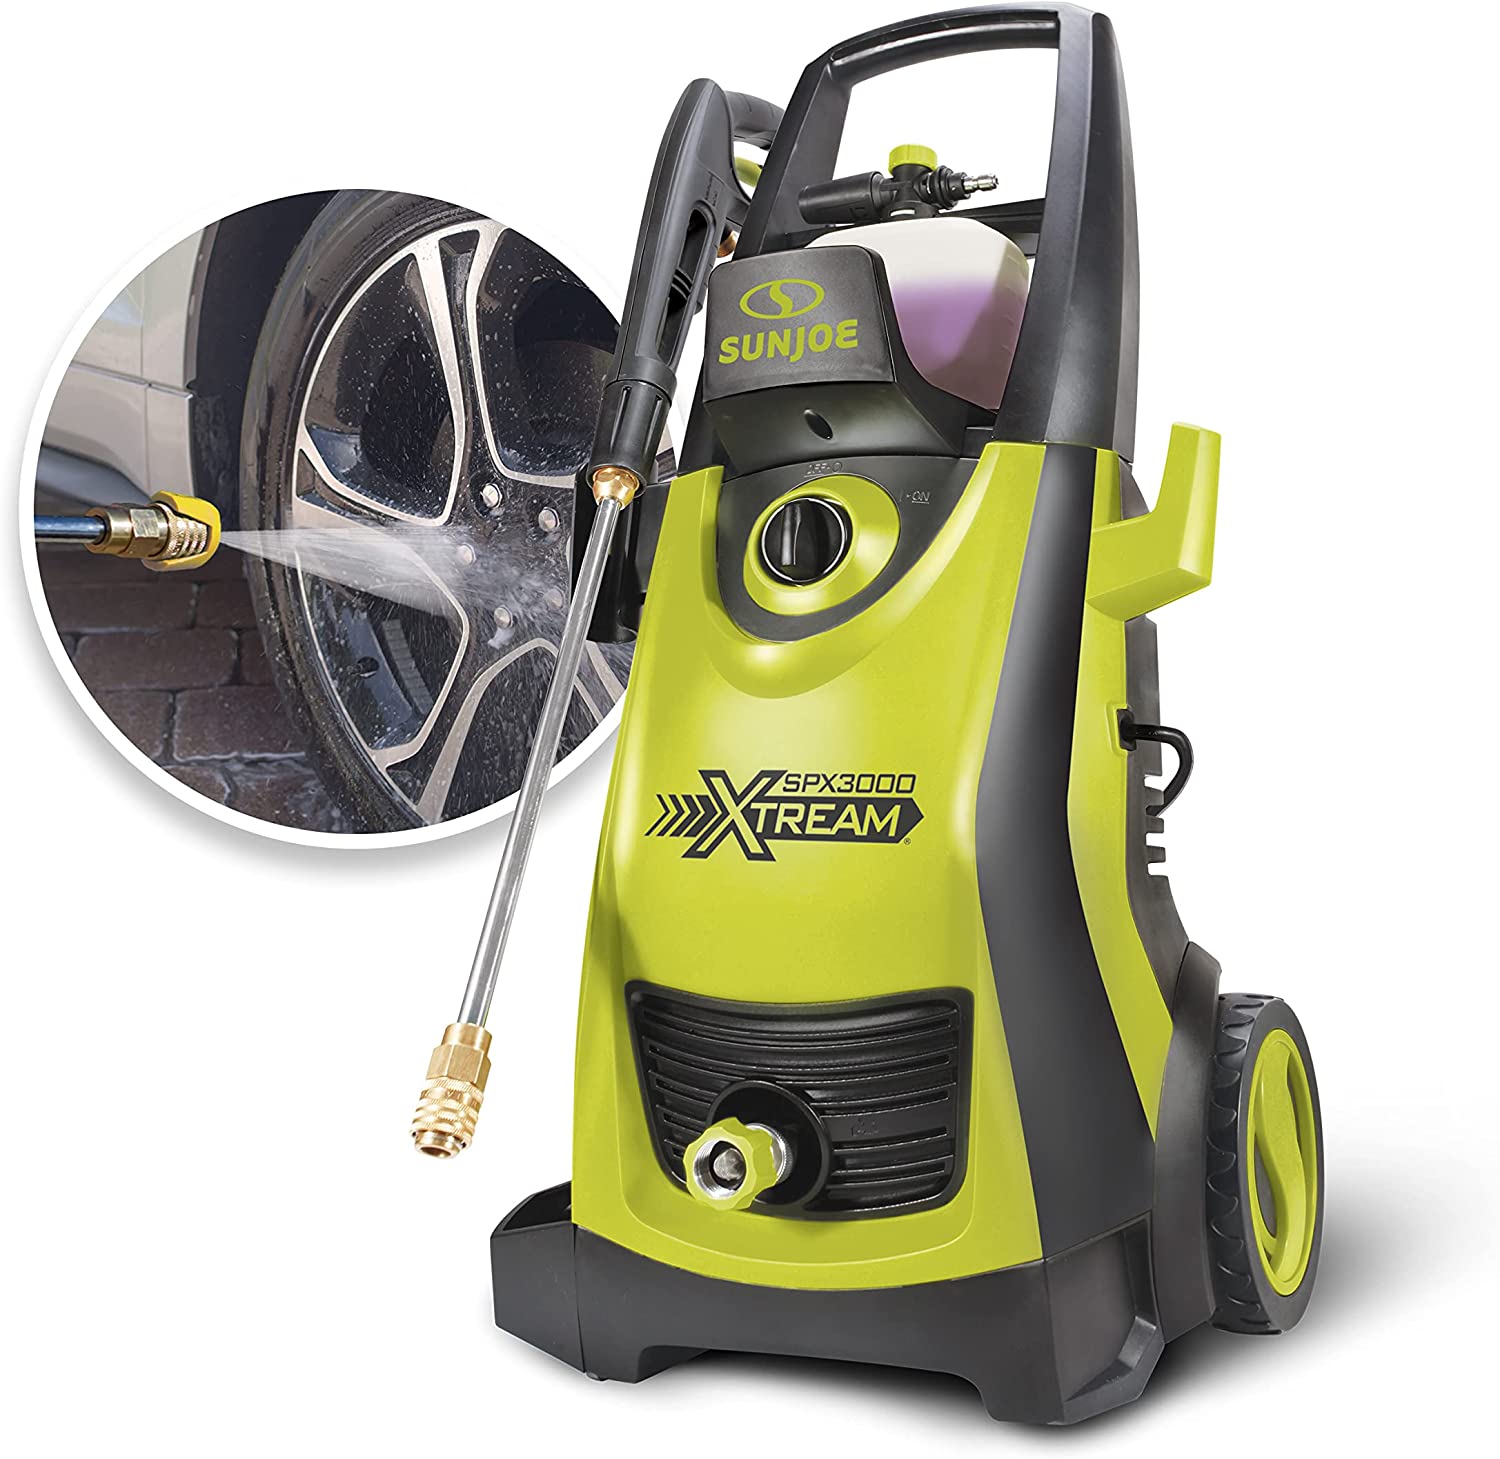 Read more about the article How to buy a proper pressure washer?